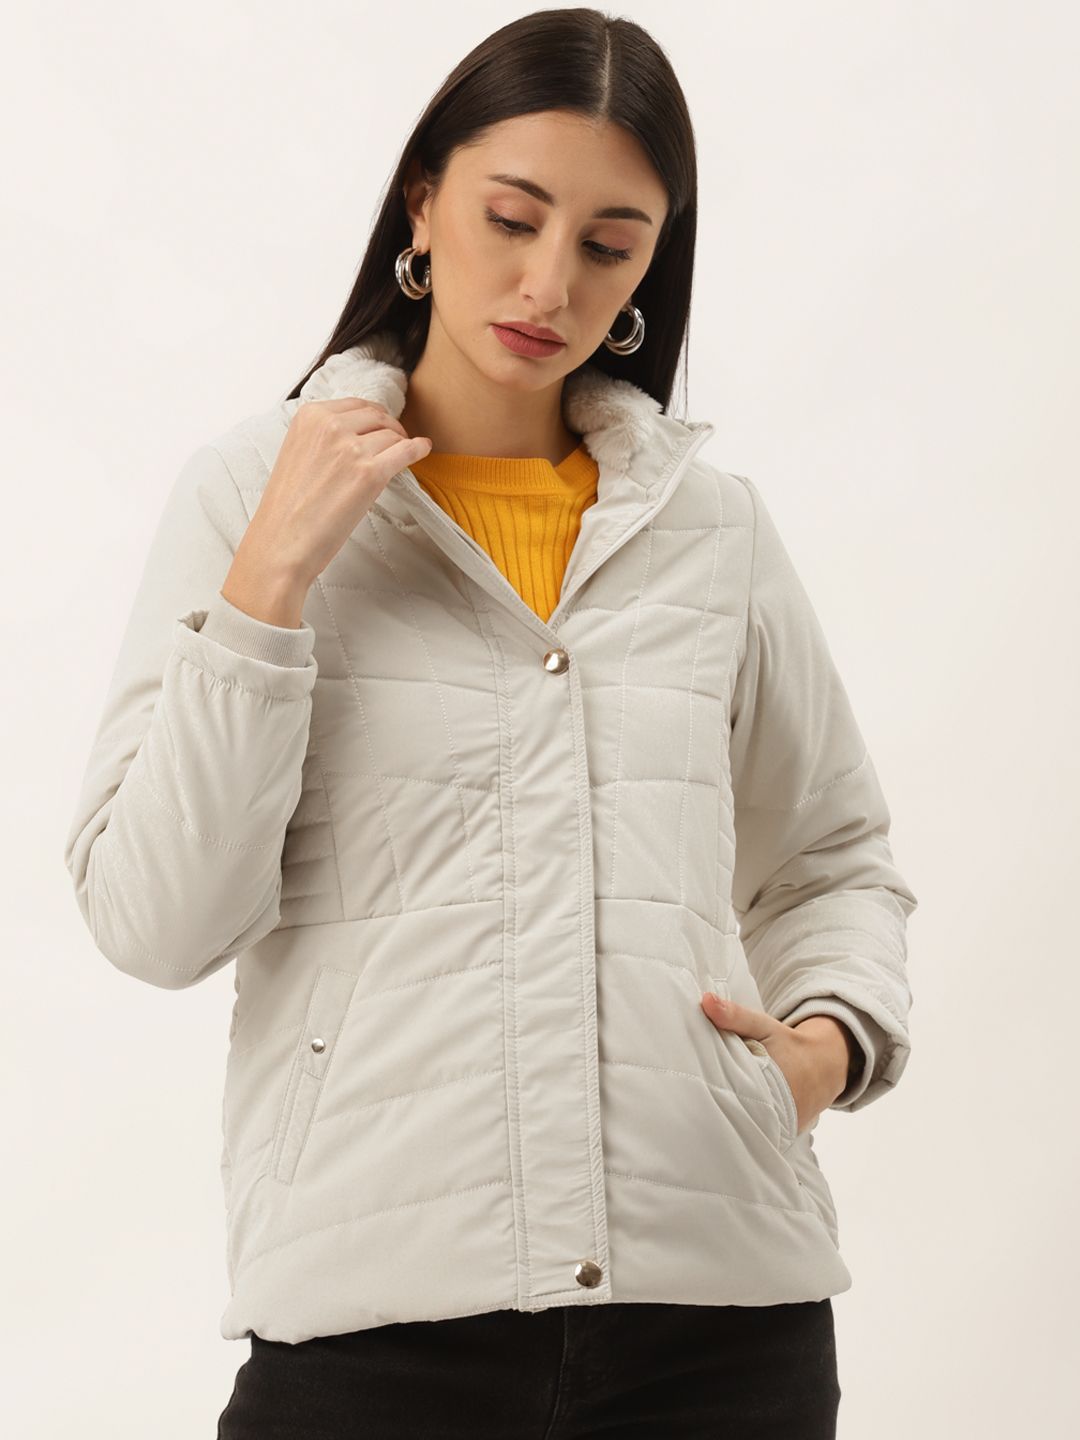 Duke Women White Padded Jacket with Faux Fur trim Price in India